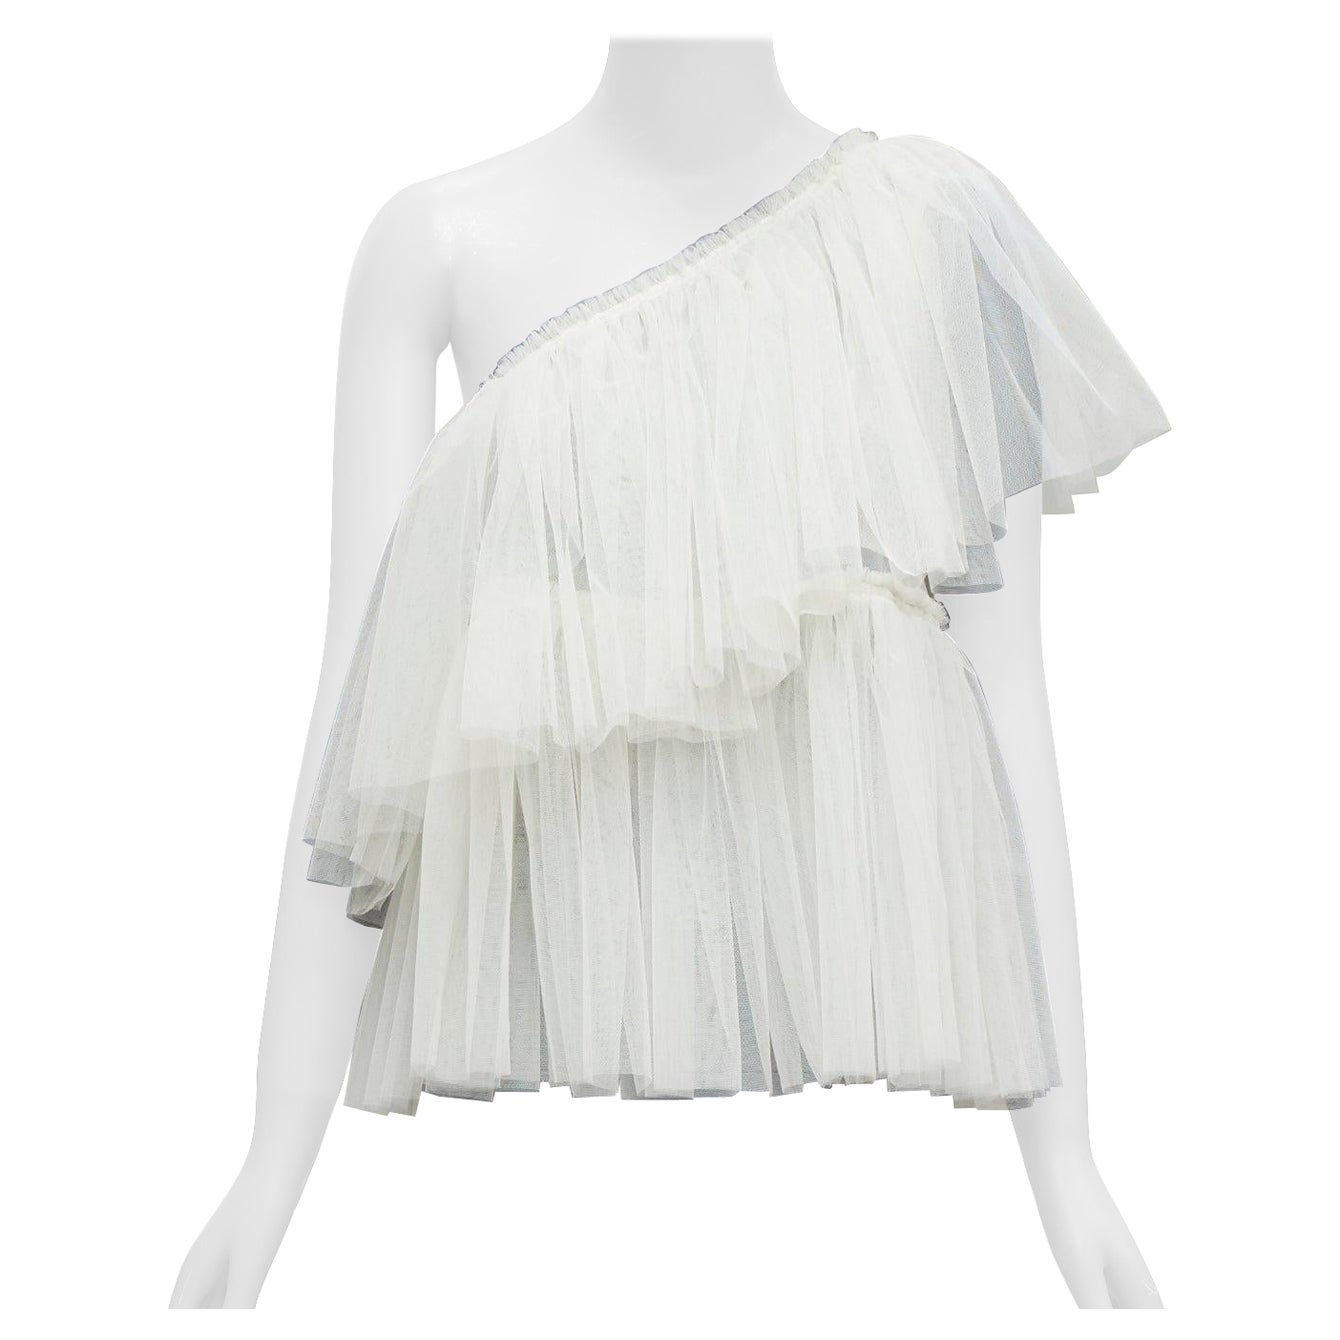 MOLLY GODDARD cream tulle tiered one shoulder sheer top UK6 XS For Sale